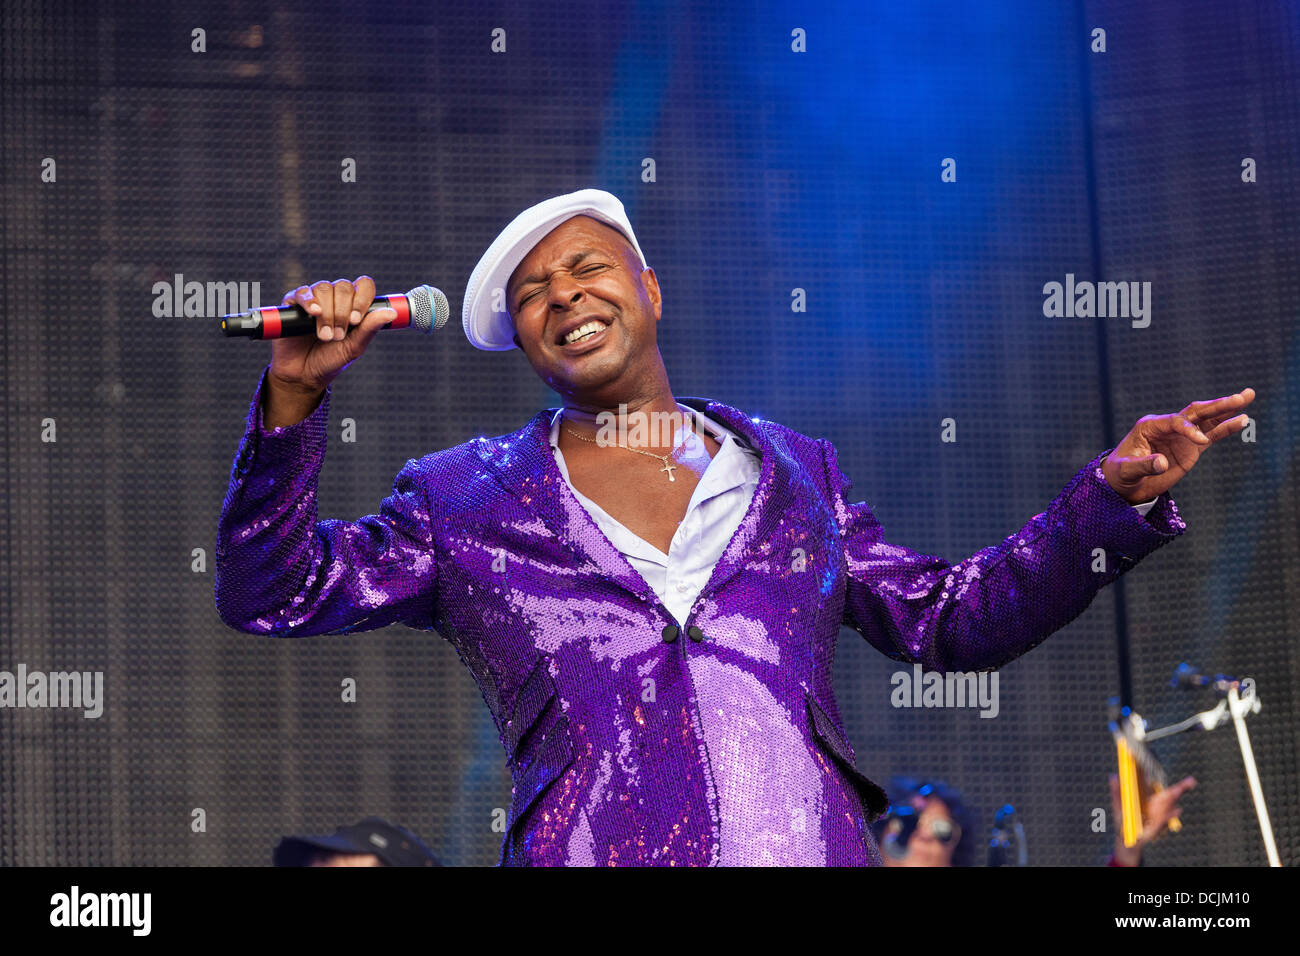 Remenham, Henley-on-Thames, Oxfordshire, UK. 18 August 2013. Singer LEE JOHN performs on-stage as part of the British soul and funk band IMAGINATION at the 2013 'REWIND - The 80s Festival' held 16-17-18 August 2013. Photograph © 2013 John Henshall/Alamy Live News. PER0371 Stock Photo